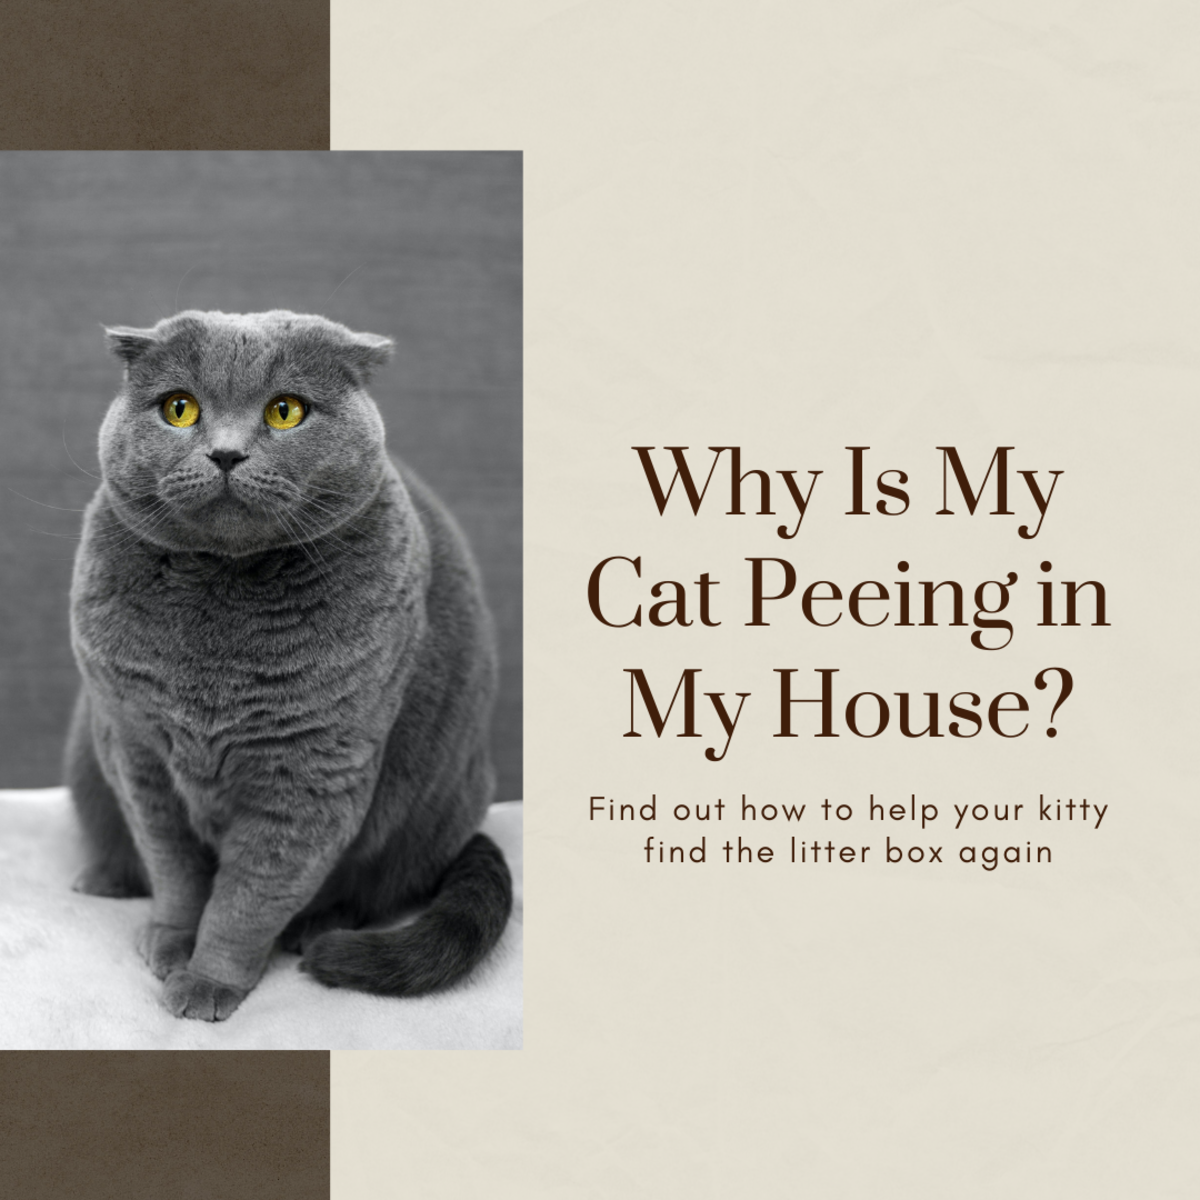 Why Is My Cat Urinating in My House?